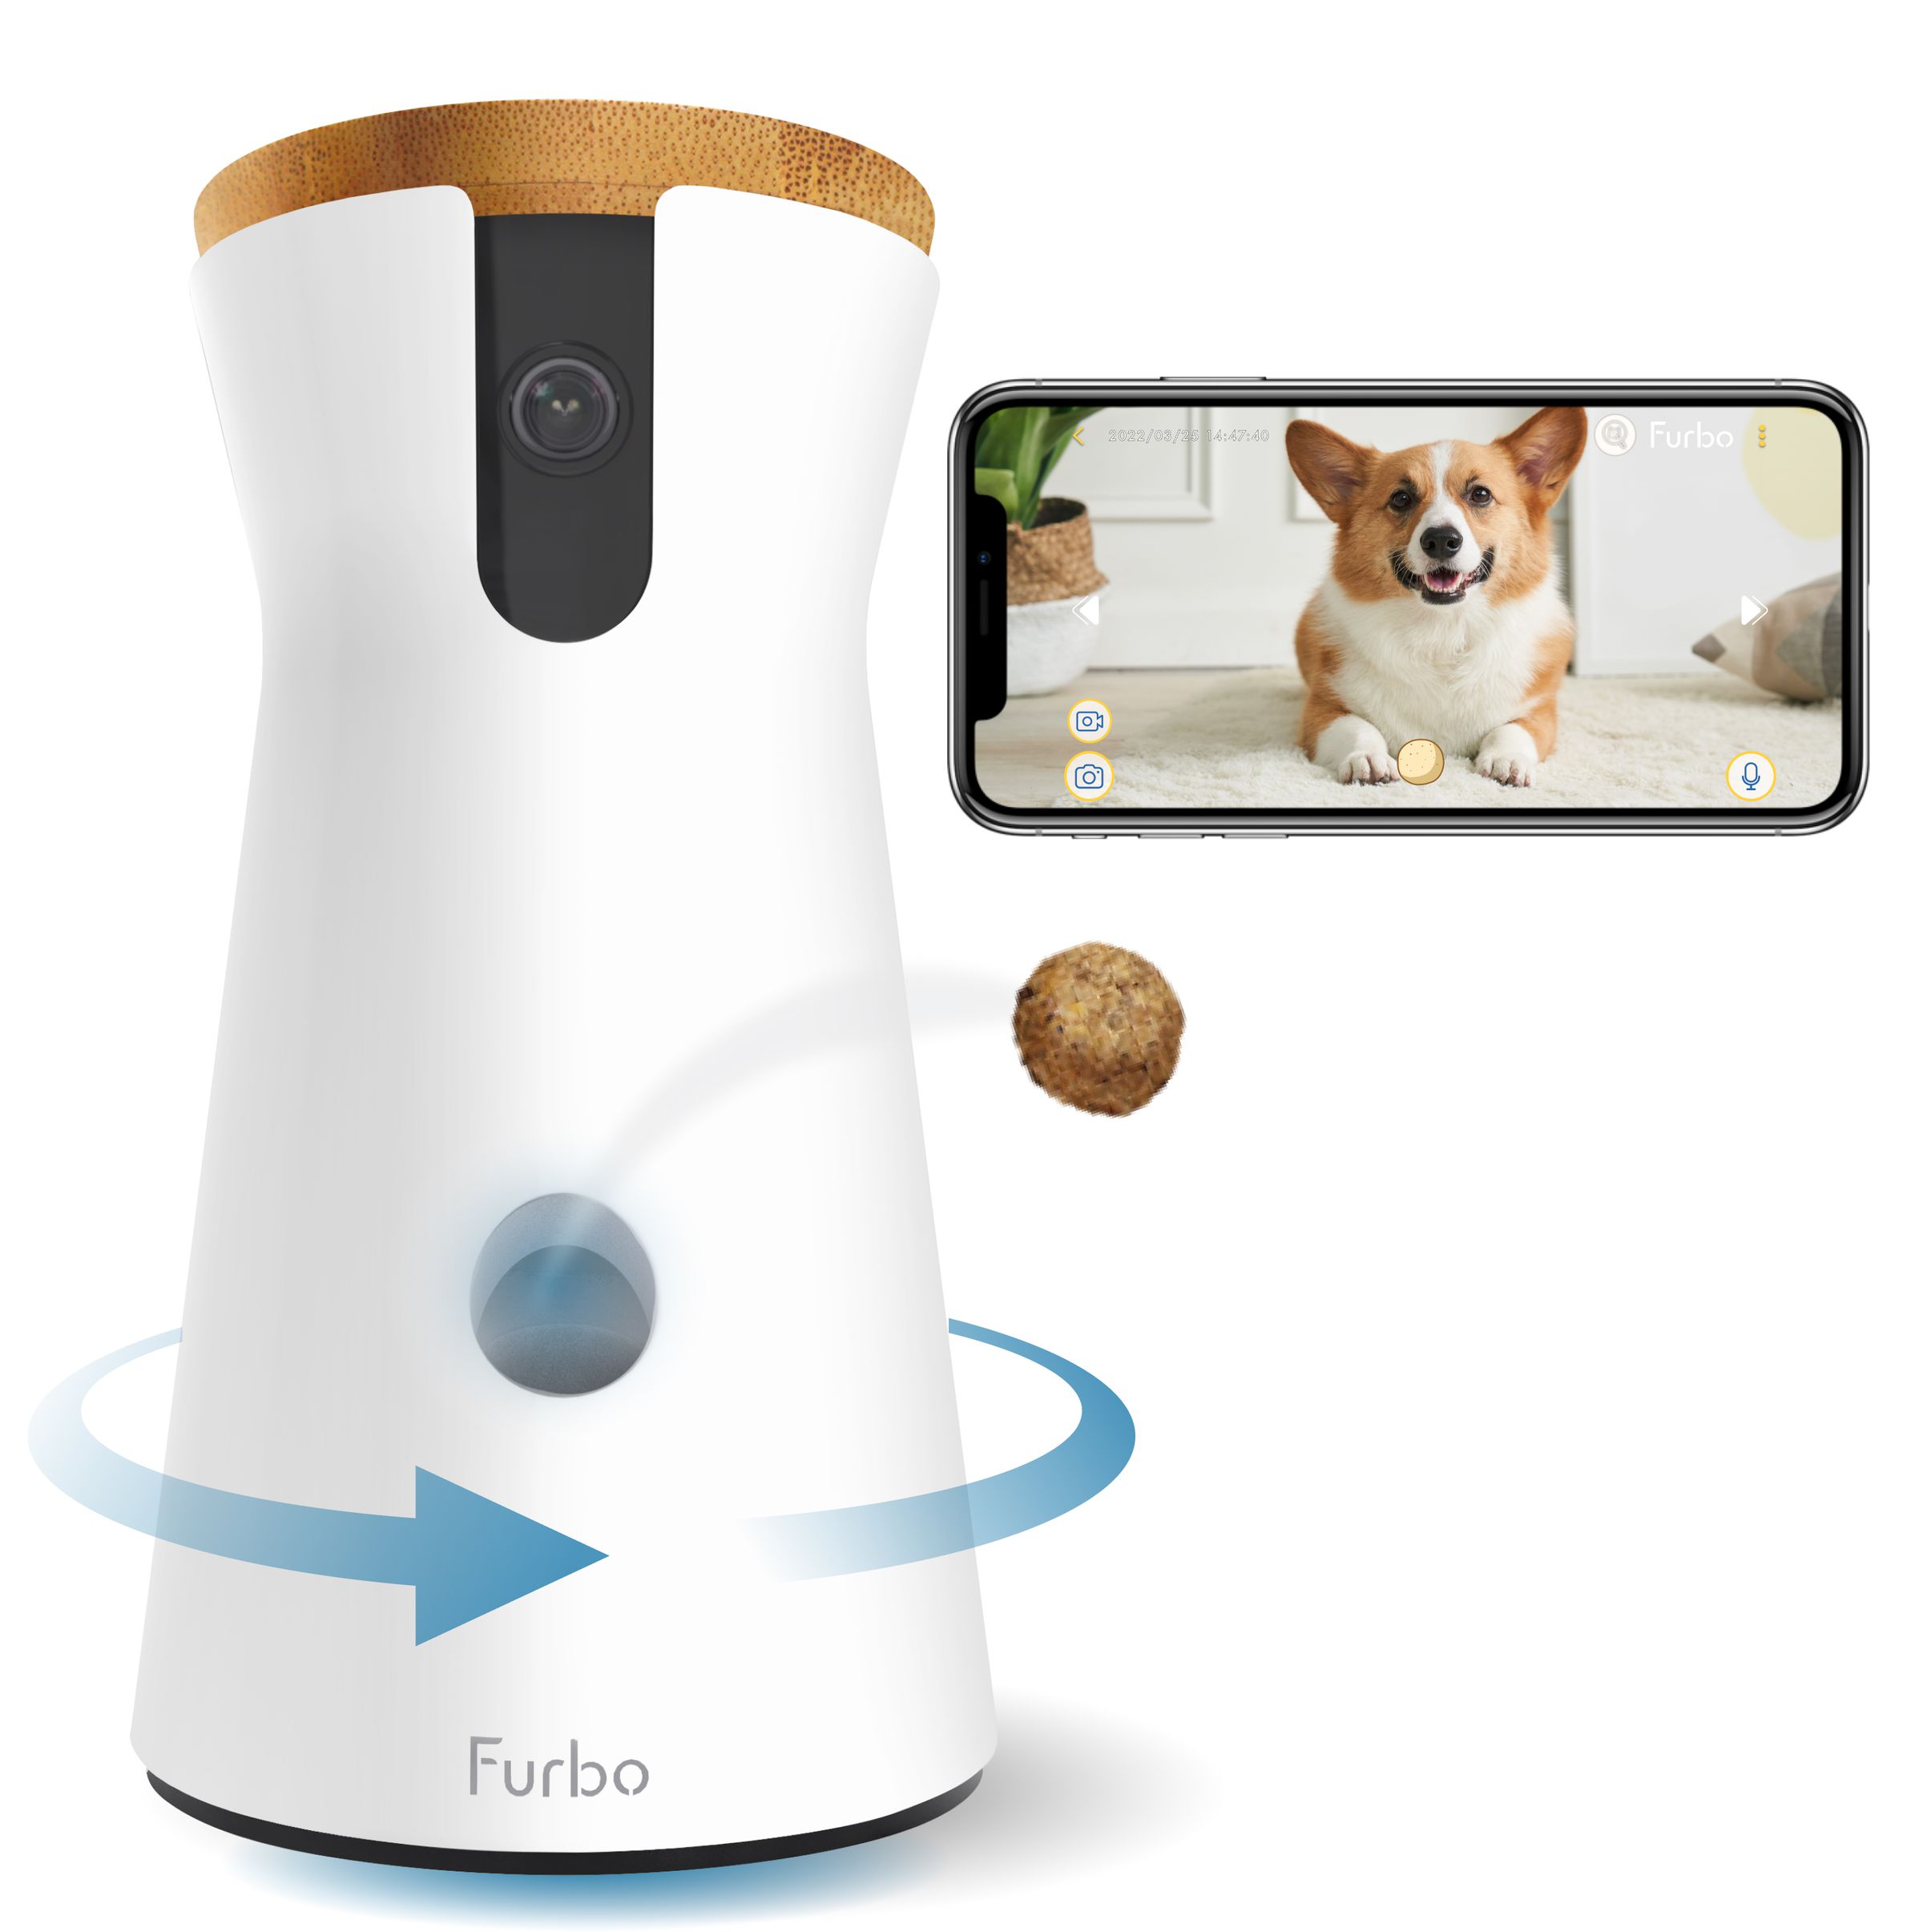 The new Furbo 360 can keep a closer eye on your pup.